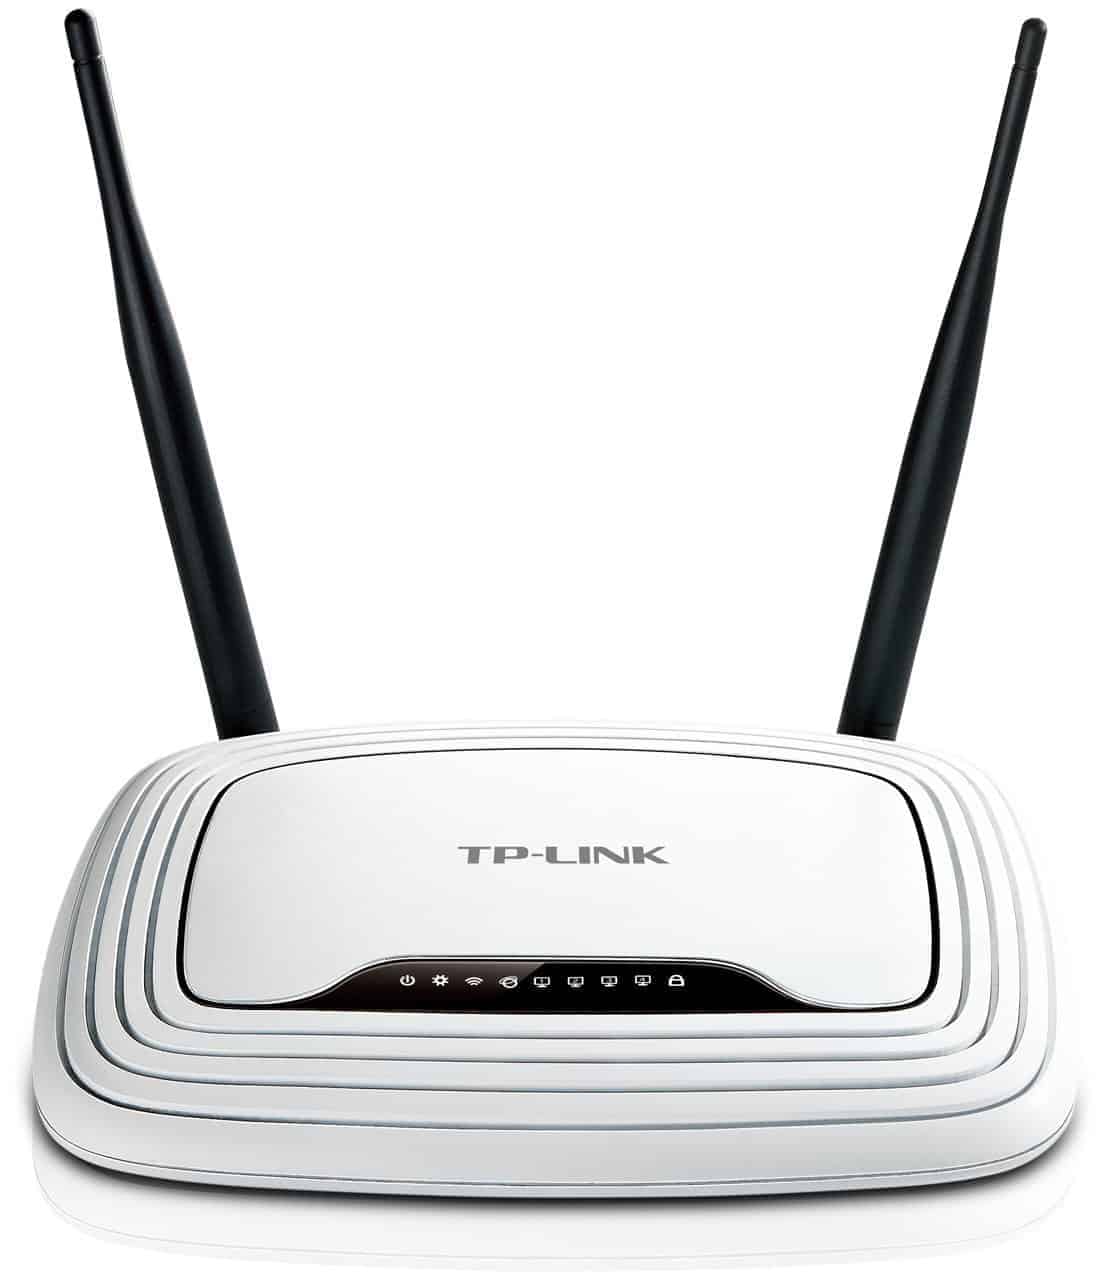 TP-Link TL-WR841N Wireless N Router review